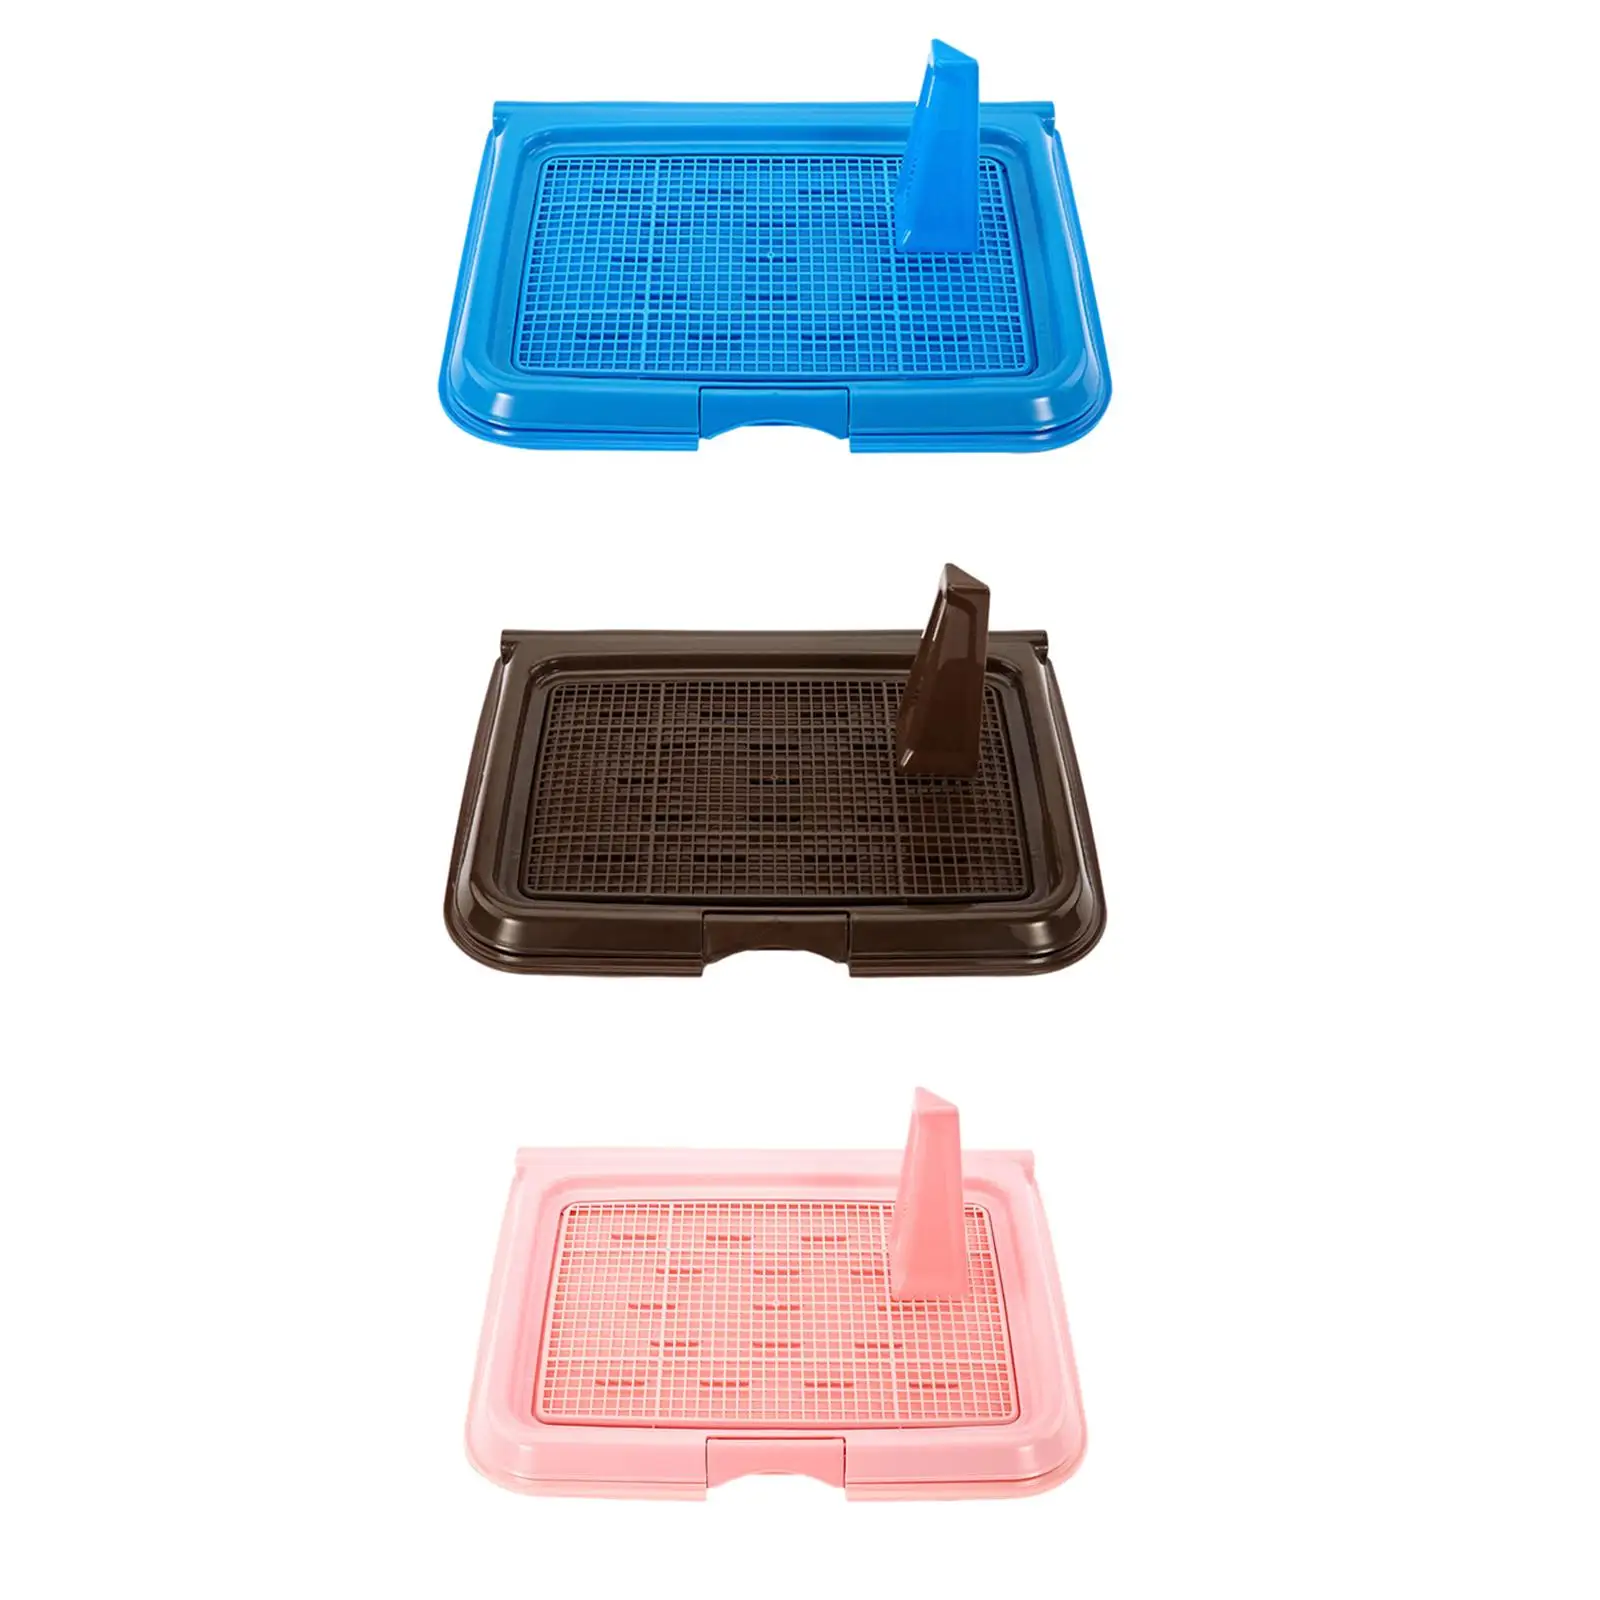 Dog Potty Tray Training Pads Holder Other Pets Pet Supplies Small Animals Dogs Toilet Training Potty Tray Training Pads Toilet